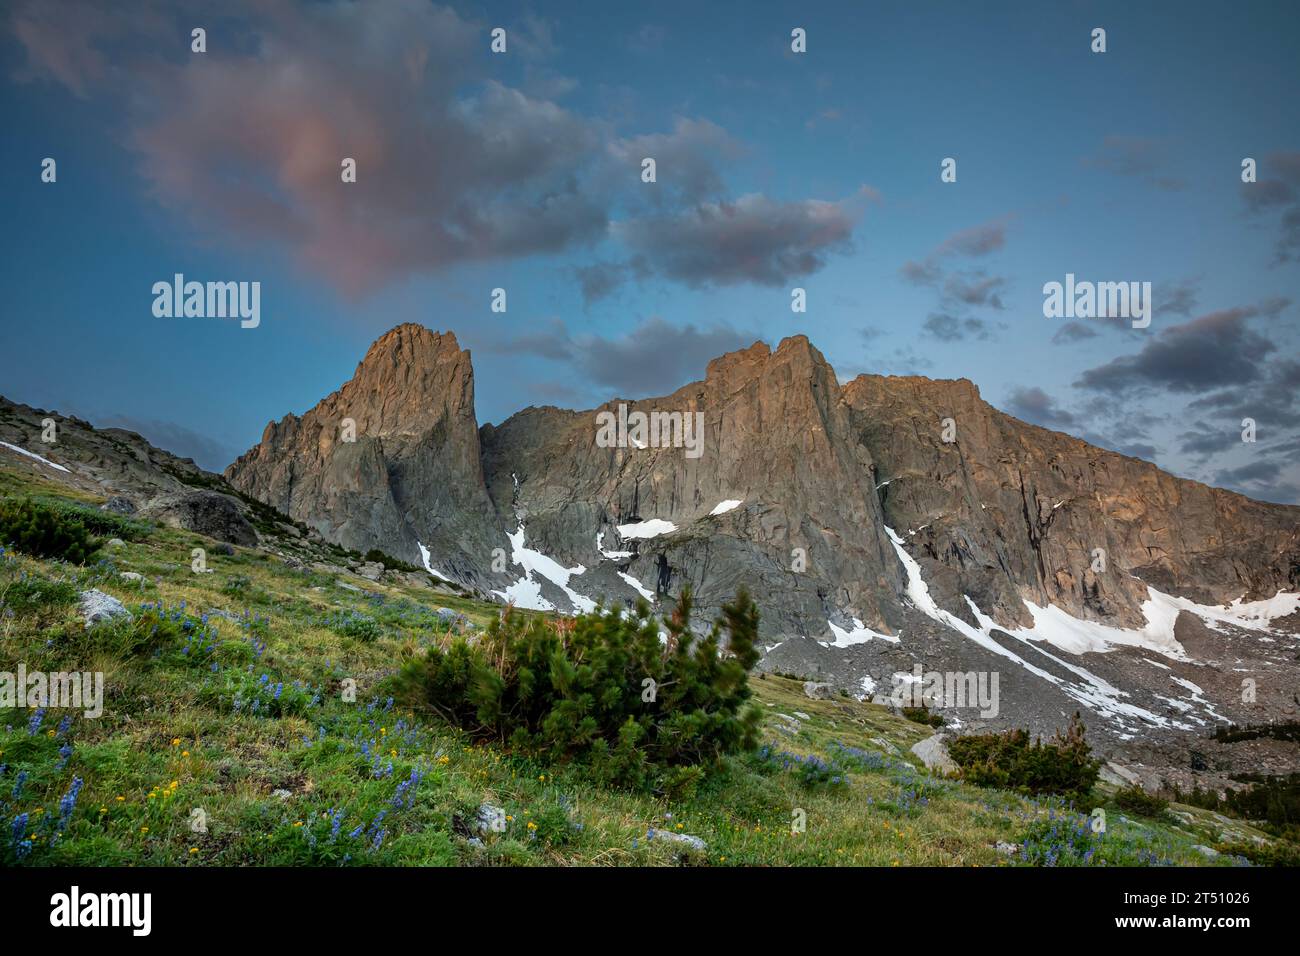 WY05579-00...WYOMING - North side of Jackass Pass at sunrise. in the Cirque of the Towers in the Popo Agie Wilderness area of the Wind River Range. Stock Photo